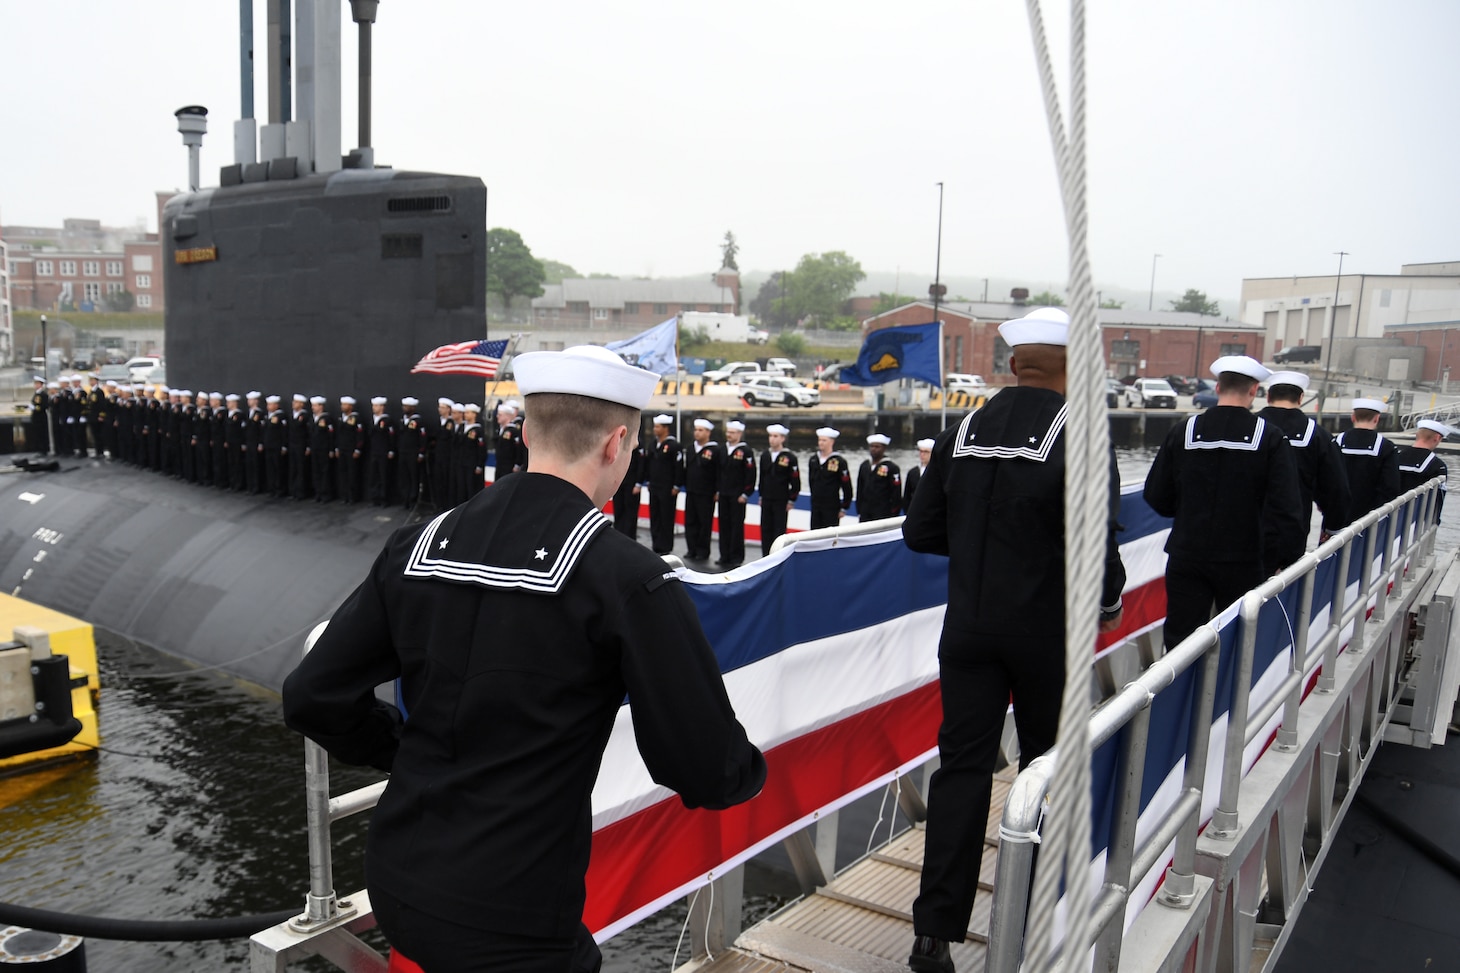 Crewmembers attached to the Virginia-class fast attack submarine USS Oregon (SSN 793) run aboard to “bring the ship to life” during a commissioning ceremony in Groton, Conn., May 28, 2022.